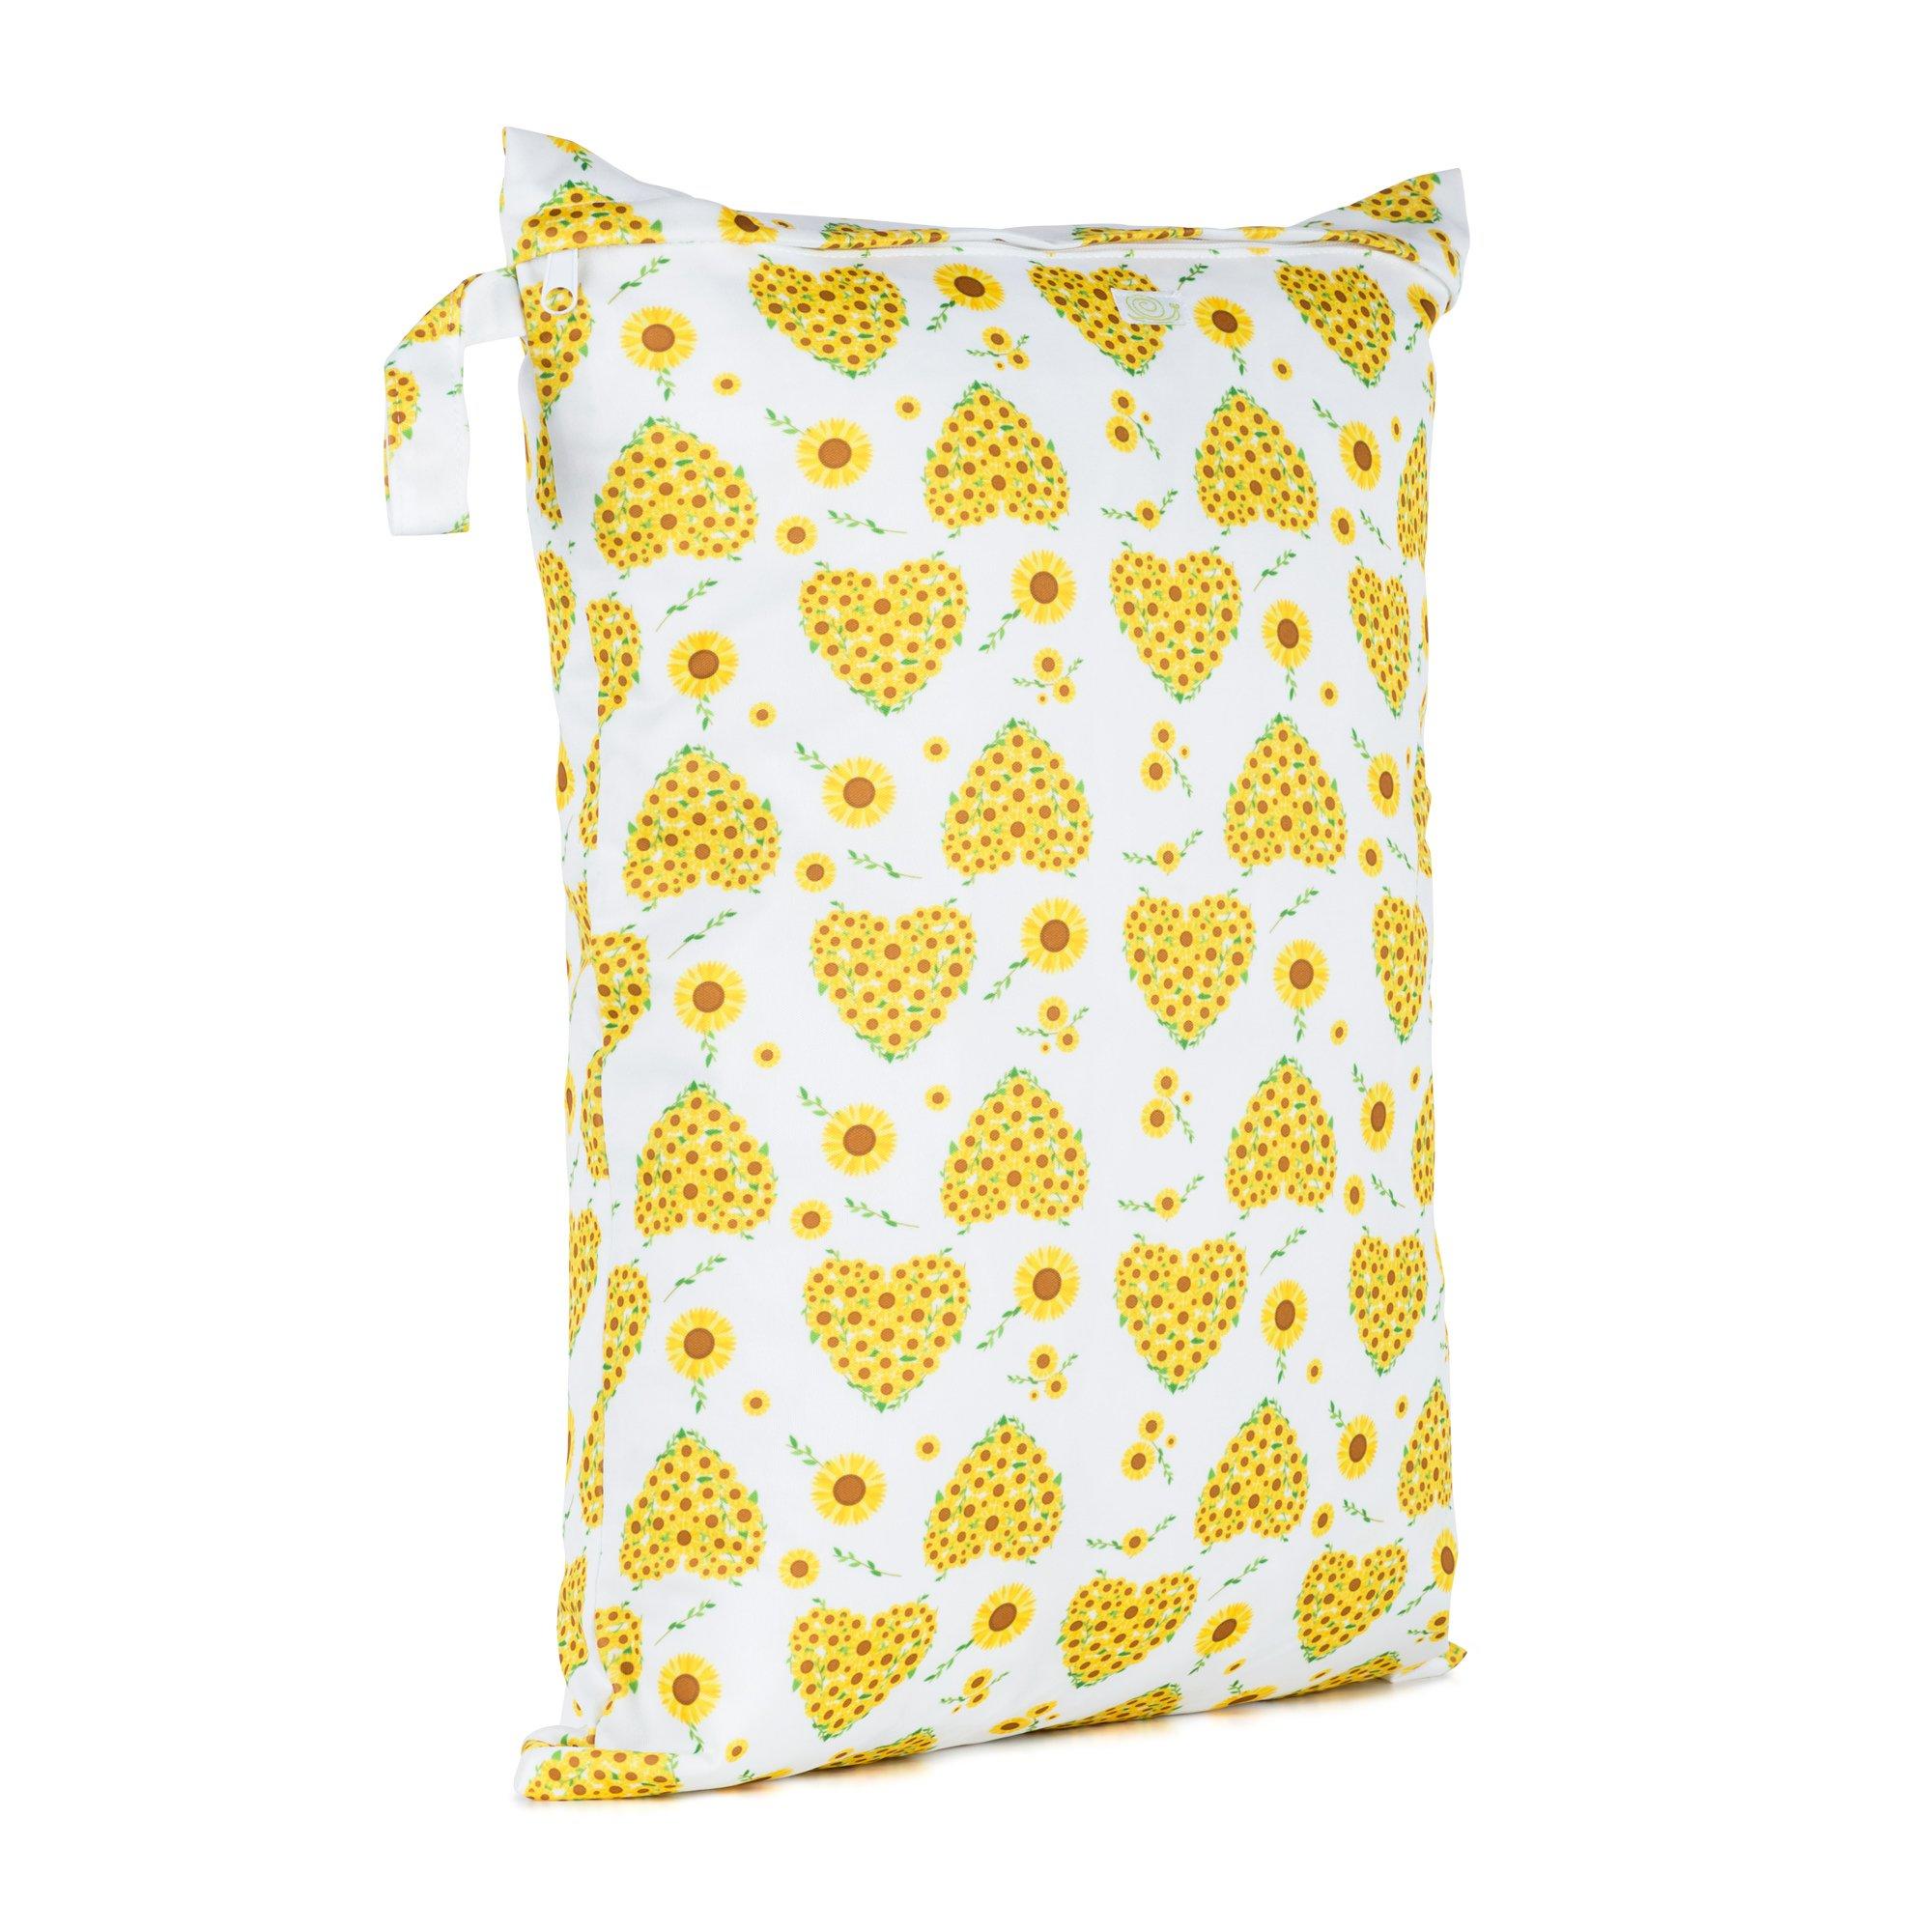 image of wet bag in sunflowers print